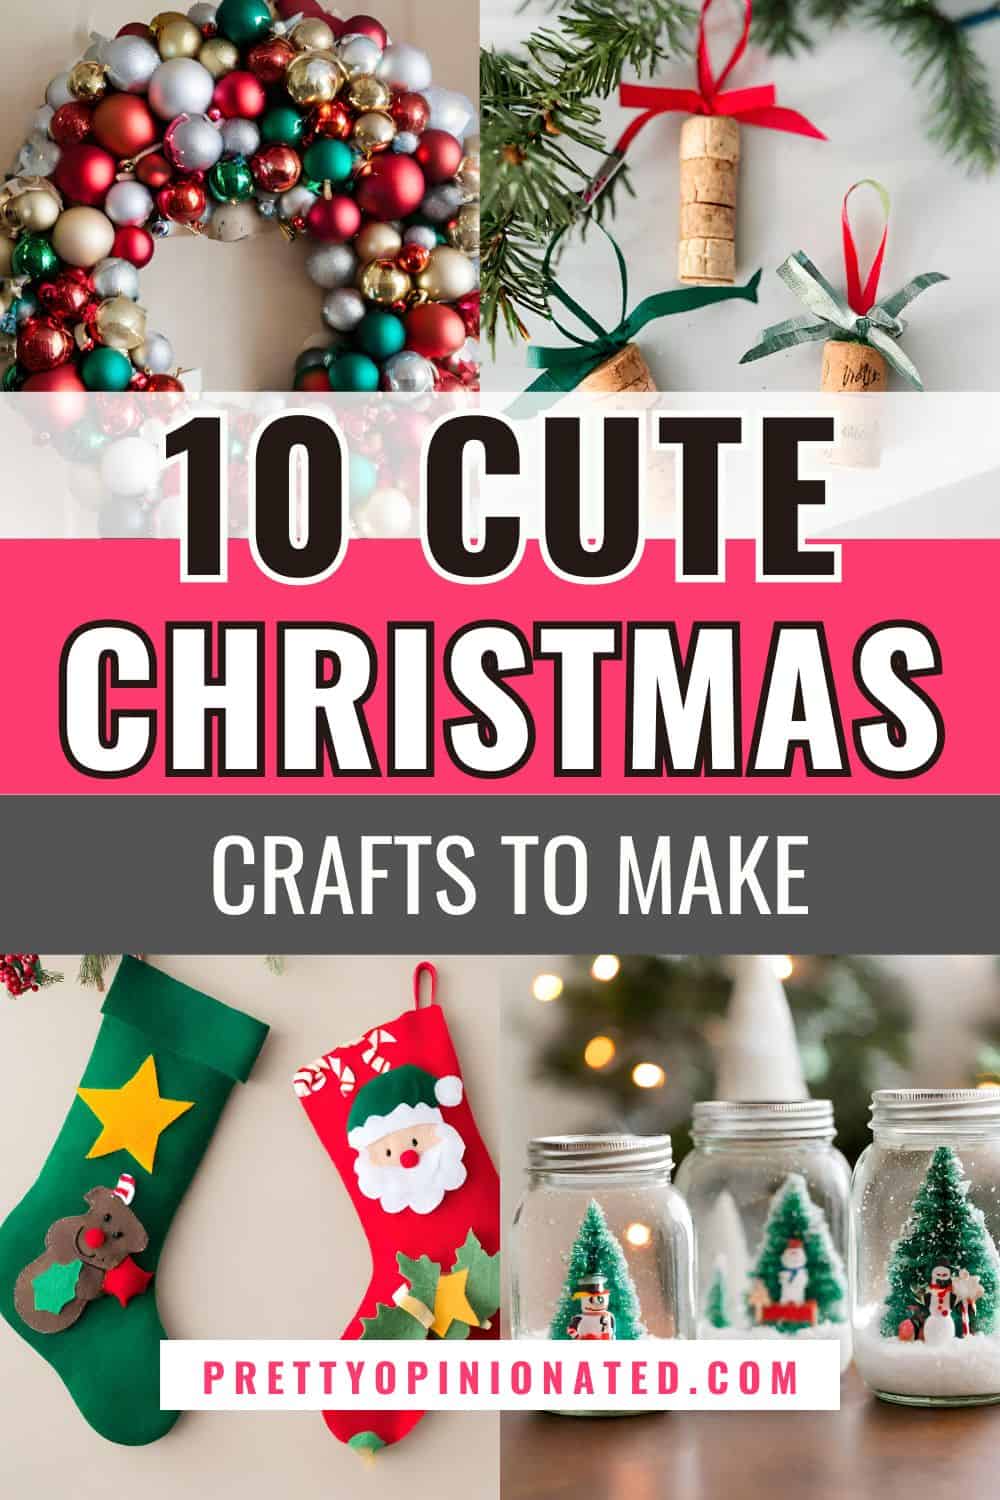 Elevate your holiday decor with these 10 enchanting DIY Christmas decorations! From handcrafted ornament wreaths to upcycled wine cork ornaments, discover easy-to-follow steps for creating festive charm. Bring the joy of crafting to your home this season. 🎄✨